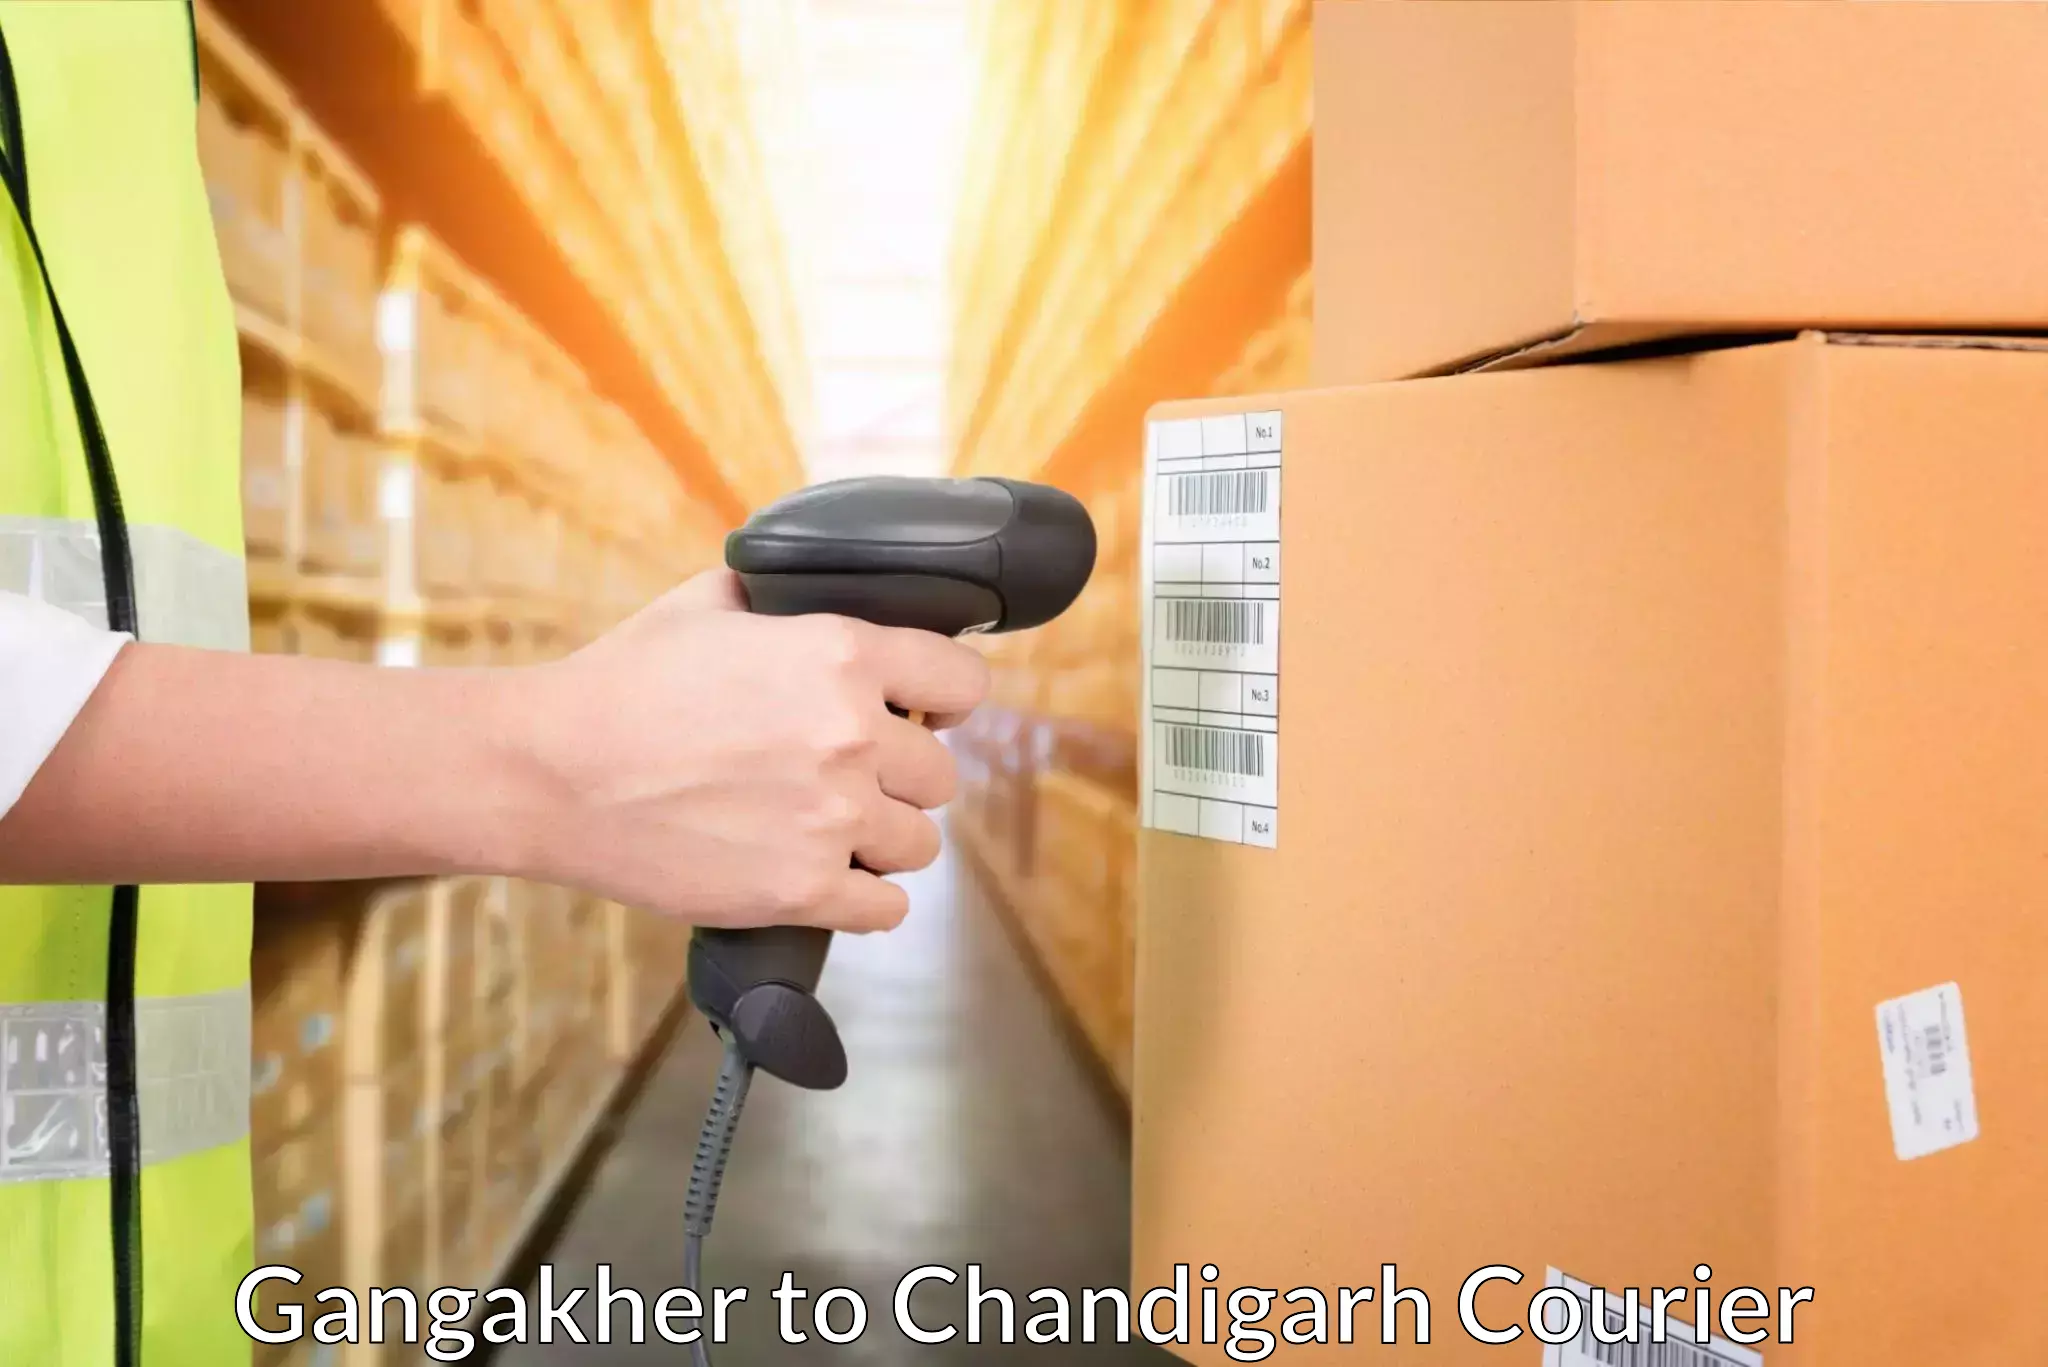 Courier service comparison in Gangakher to Panjab University Chandigarh